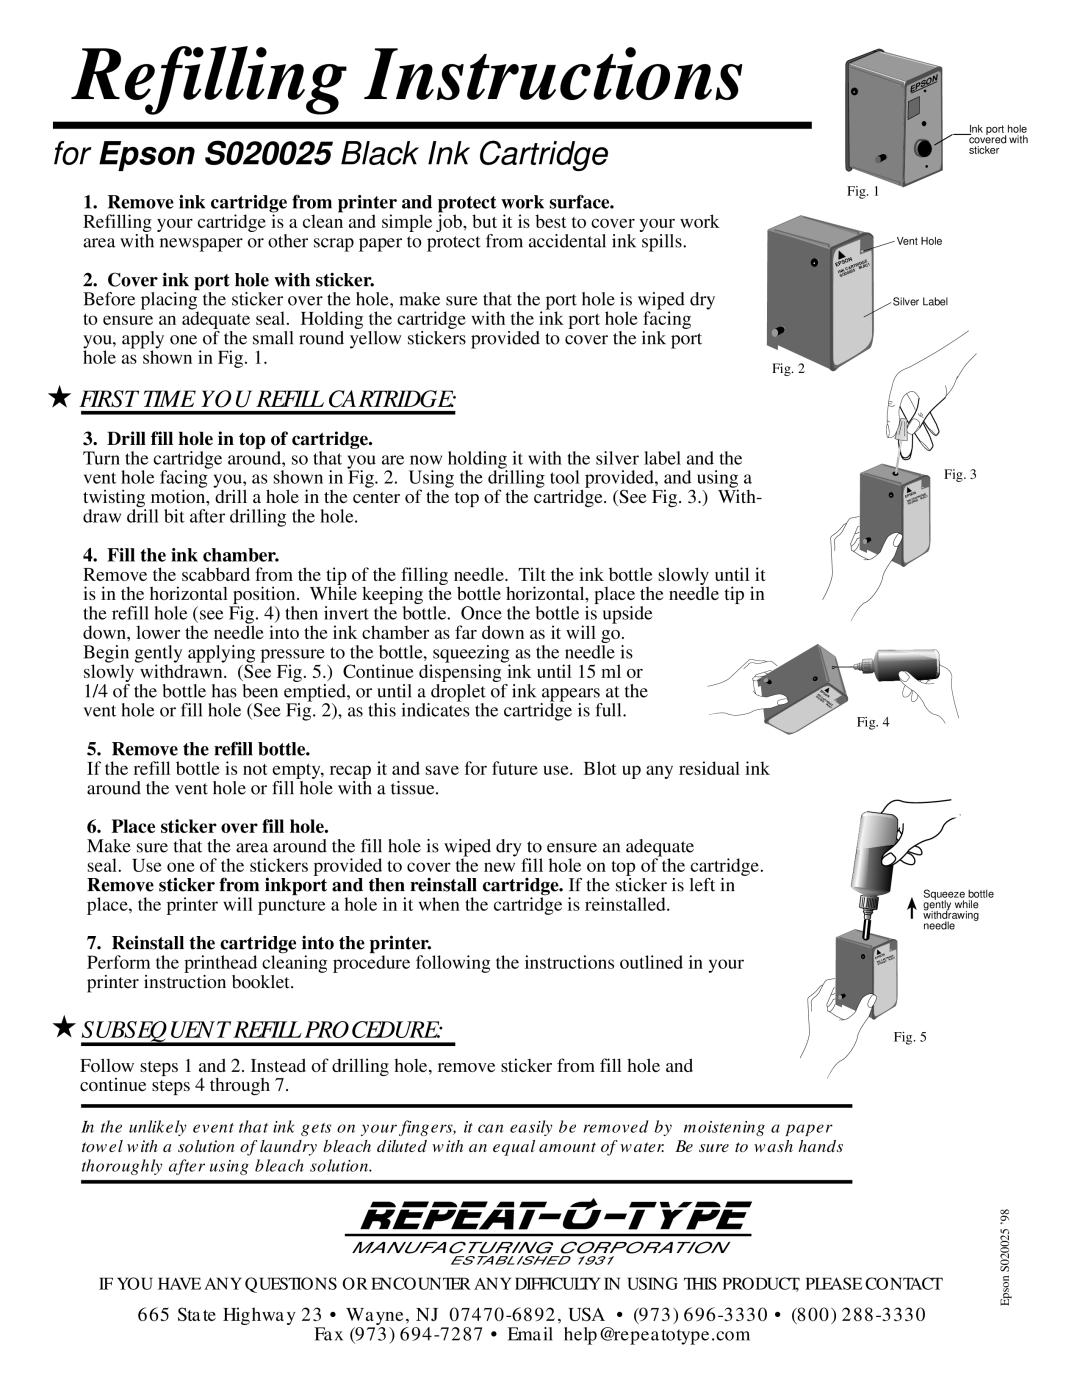 Epson manual Refilling Instructions, for Epson S020025 Black Ink Cartridge, First Time You Refill Cartridge 